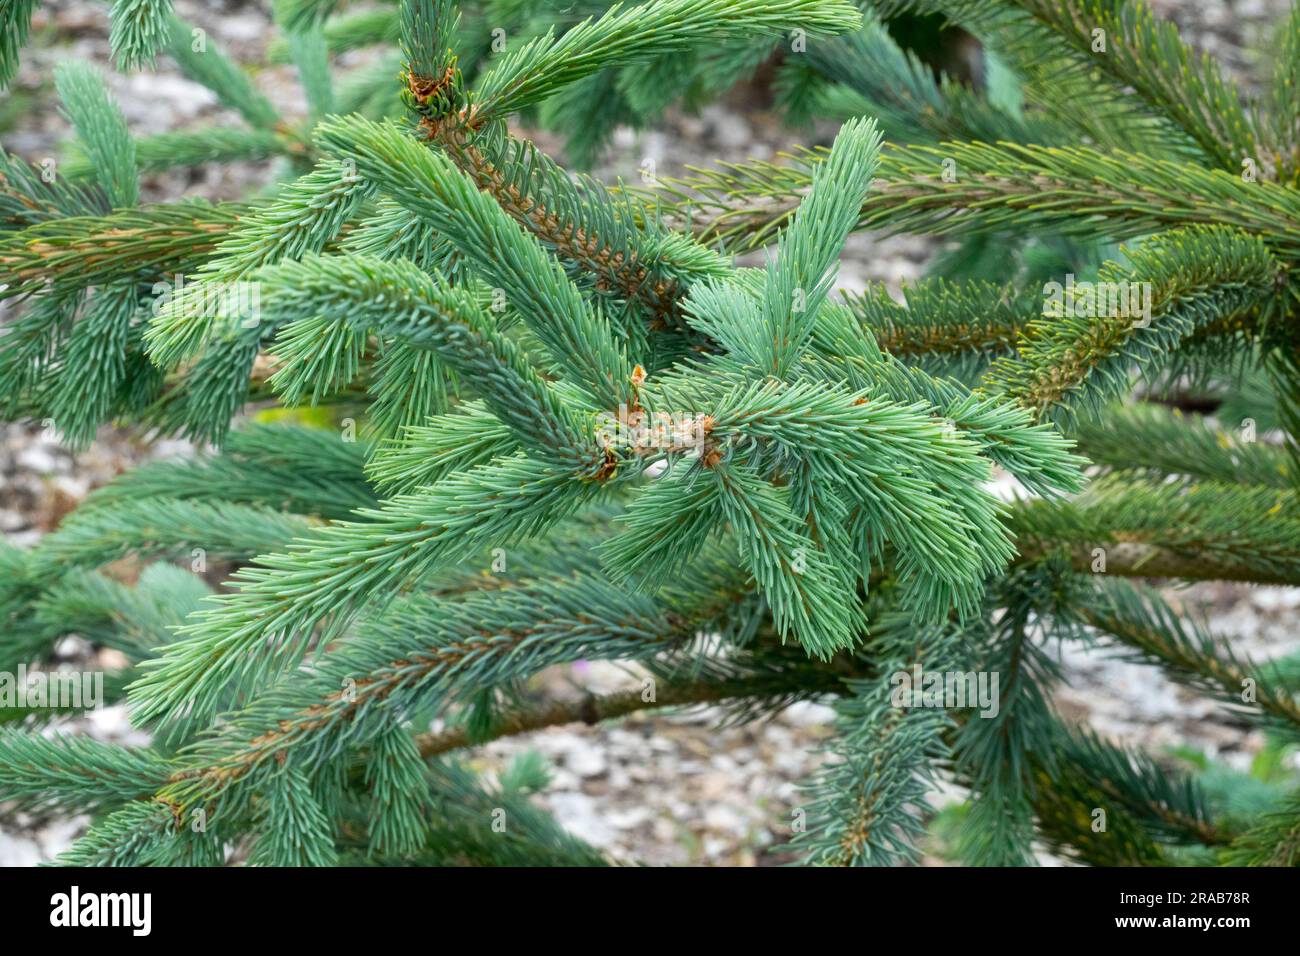 Picea engelmannii 'Snake' the branches are rope-like, the needles are dark blue-green syn. Picea engelmannii Glauca Virgata, Picea engelmannii Virgata Stock Photo